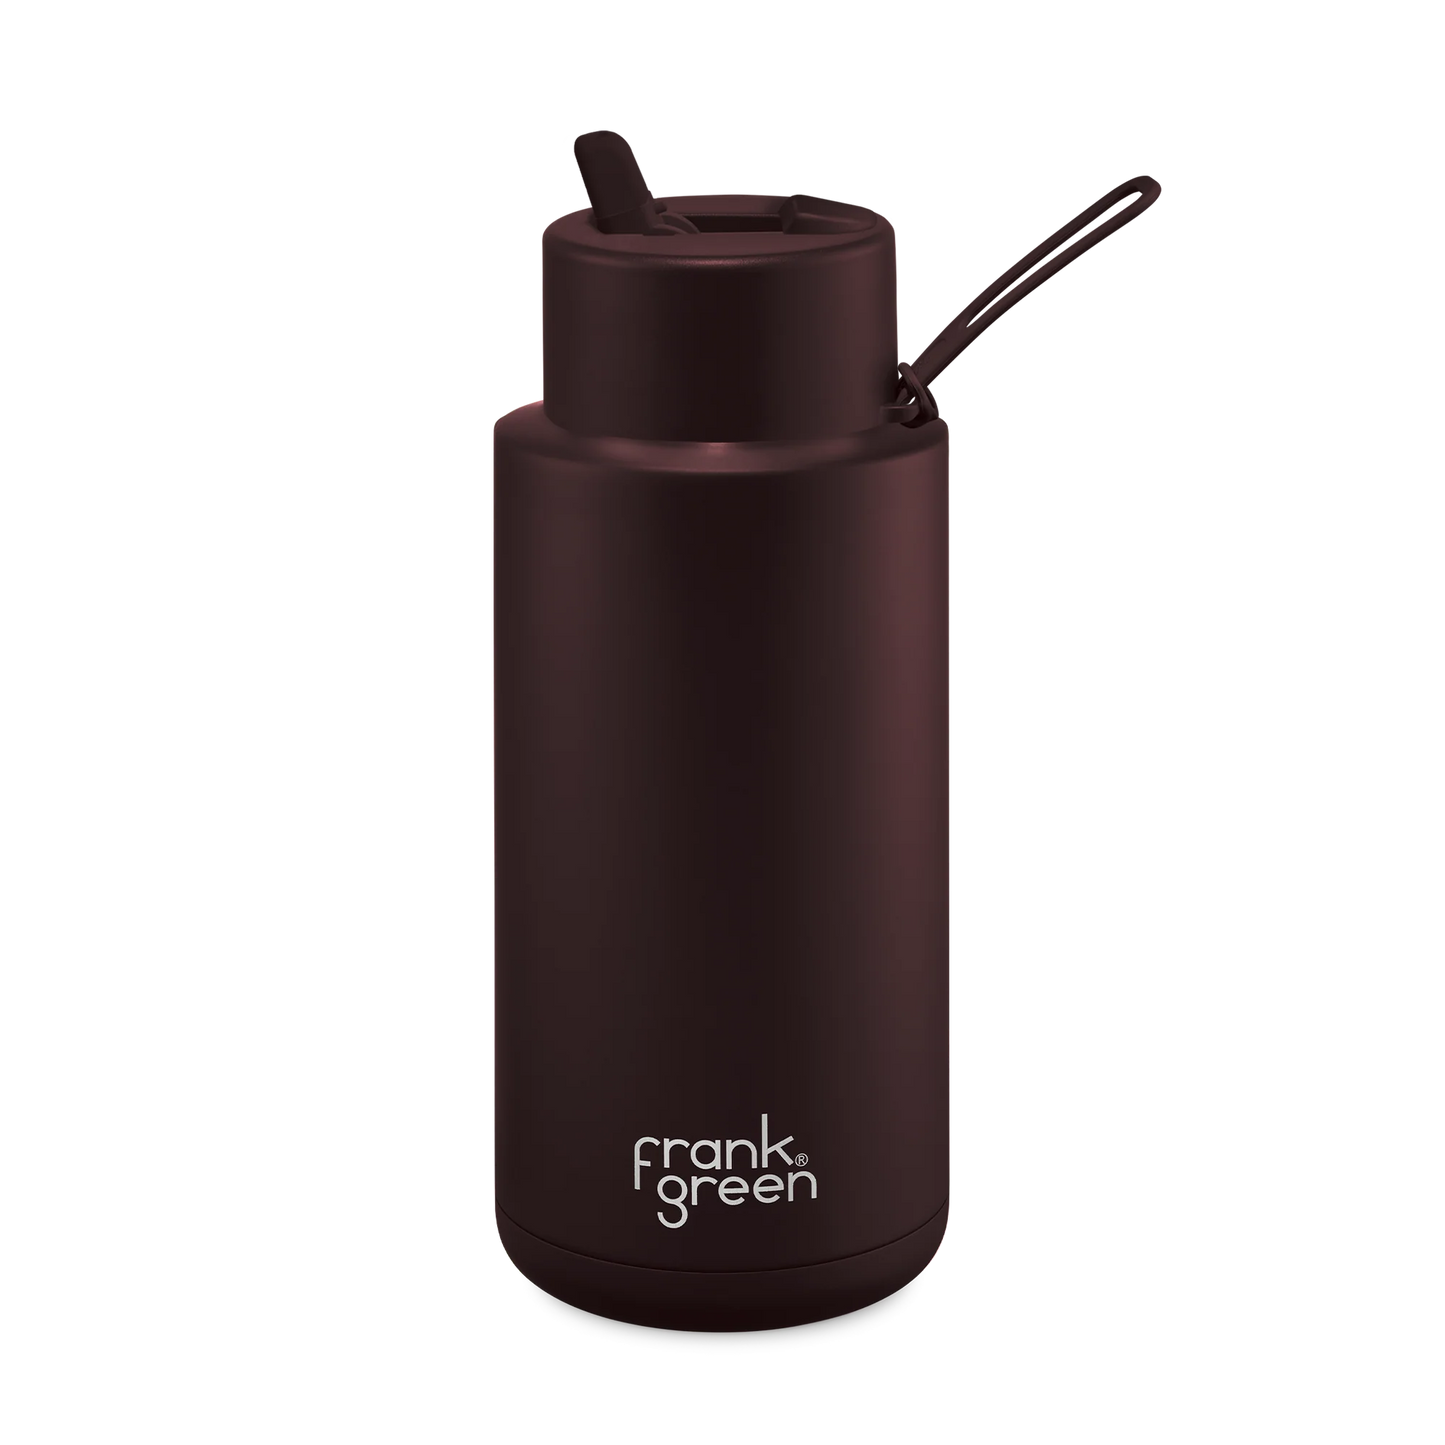 LIMITED EDITION CERAMIC REUSABLE BOTTLE (1L) - CHOCOLATE